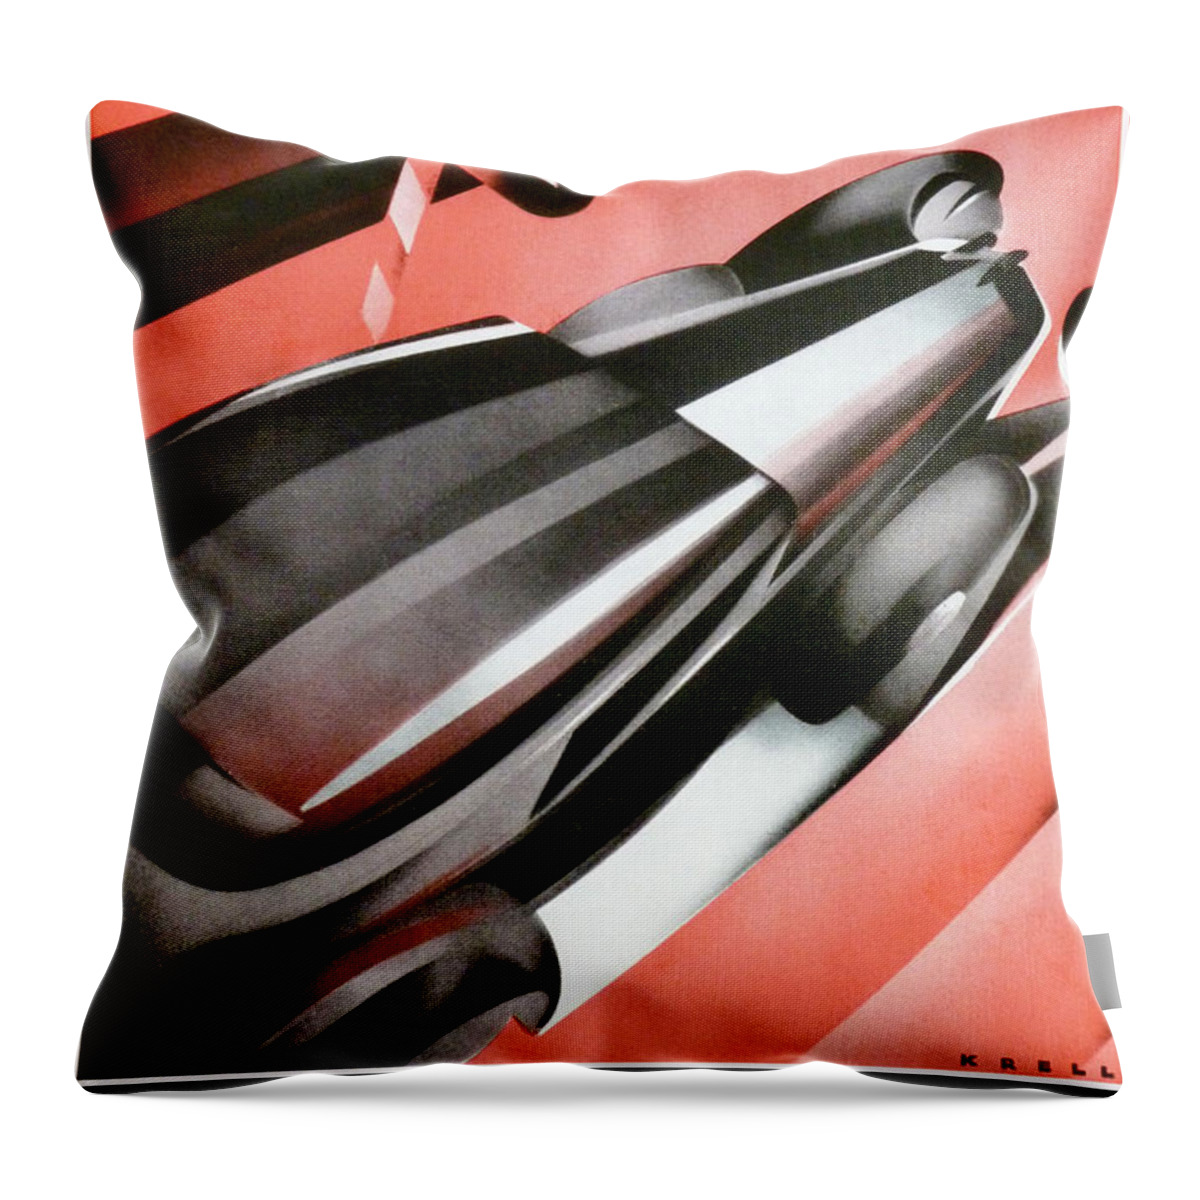 1929 Horch 8 Throw Pillow featuring the photograph Automotive Art 430 by Andrew Fare